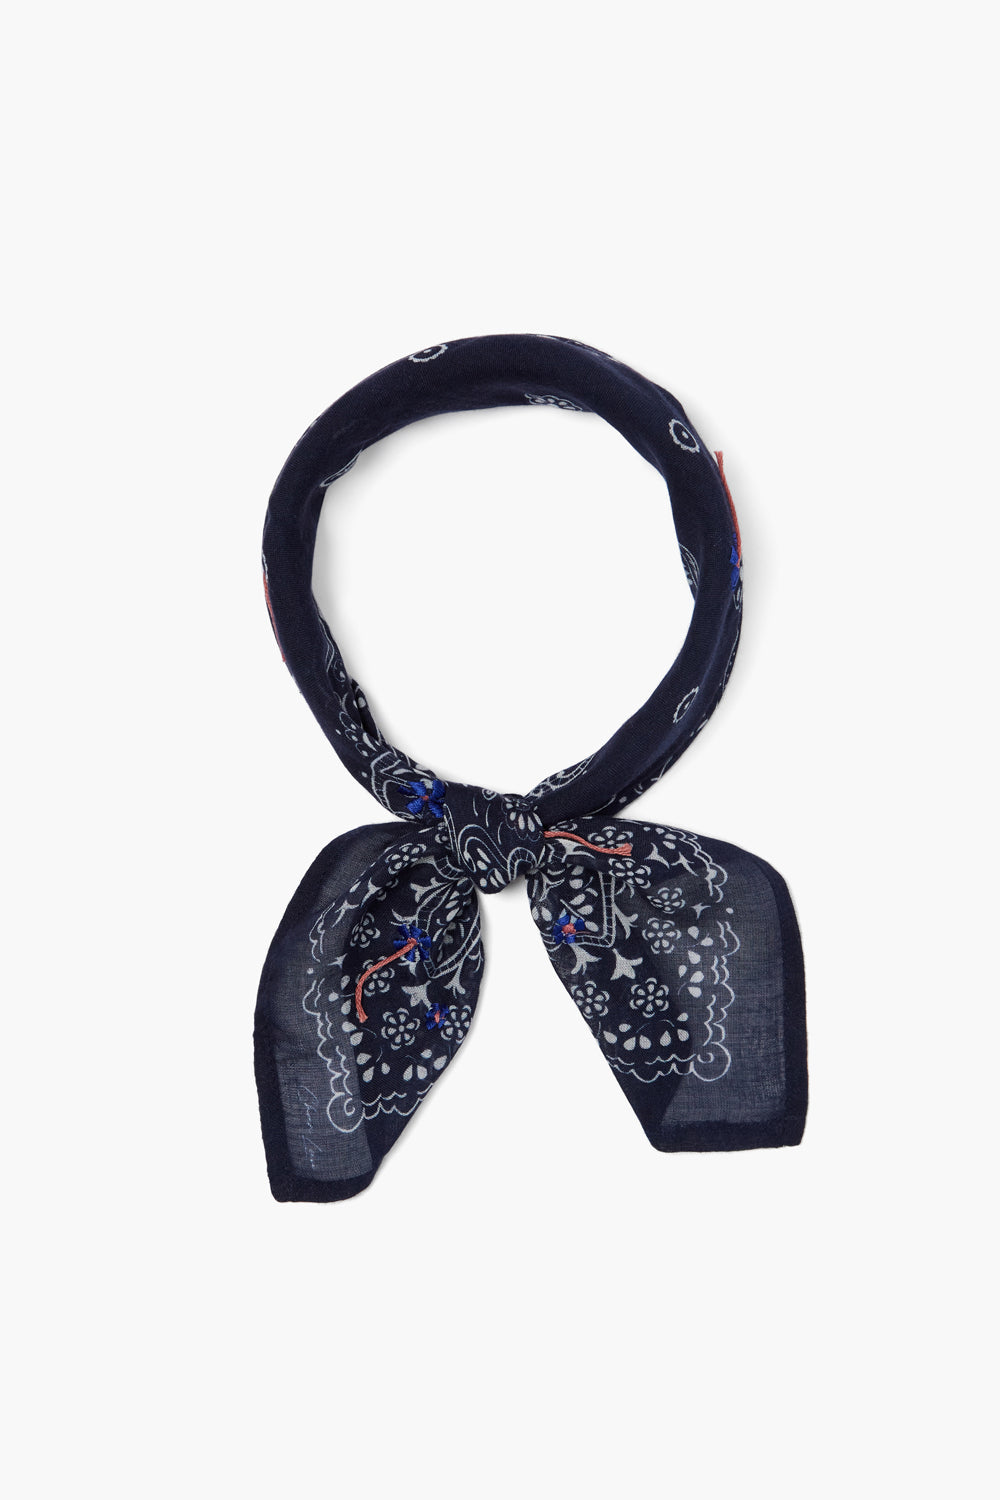 EMBROIDERED FLORAL BANDANA-DARK SAPPHIRE - Kingfisher Road - Online Boutique